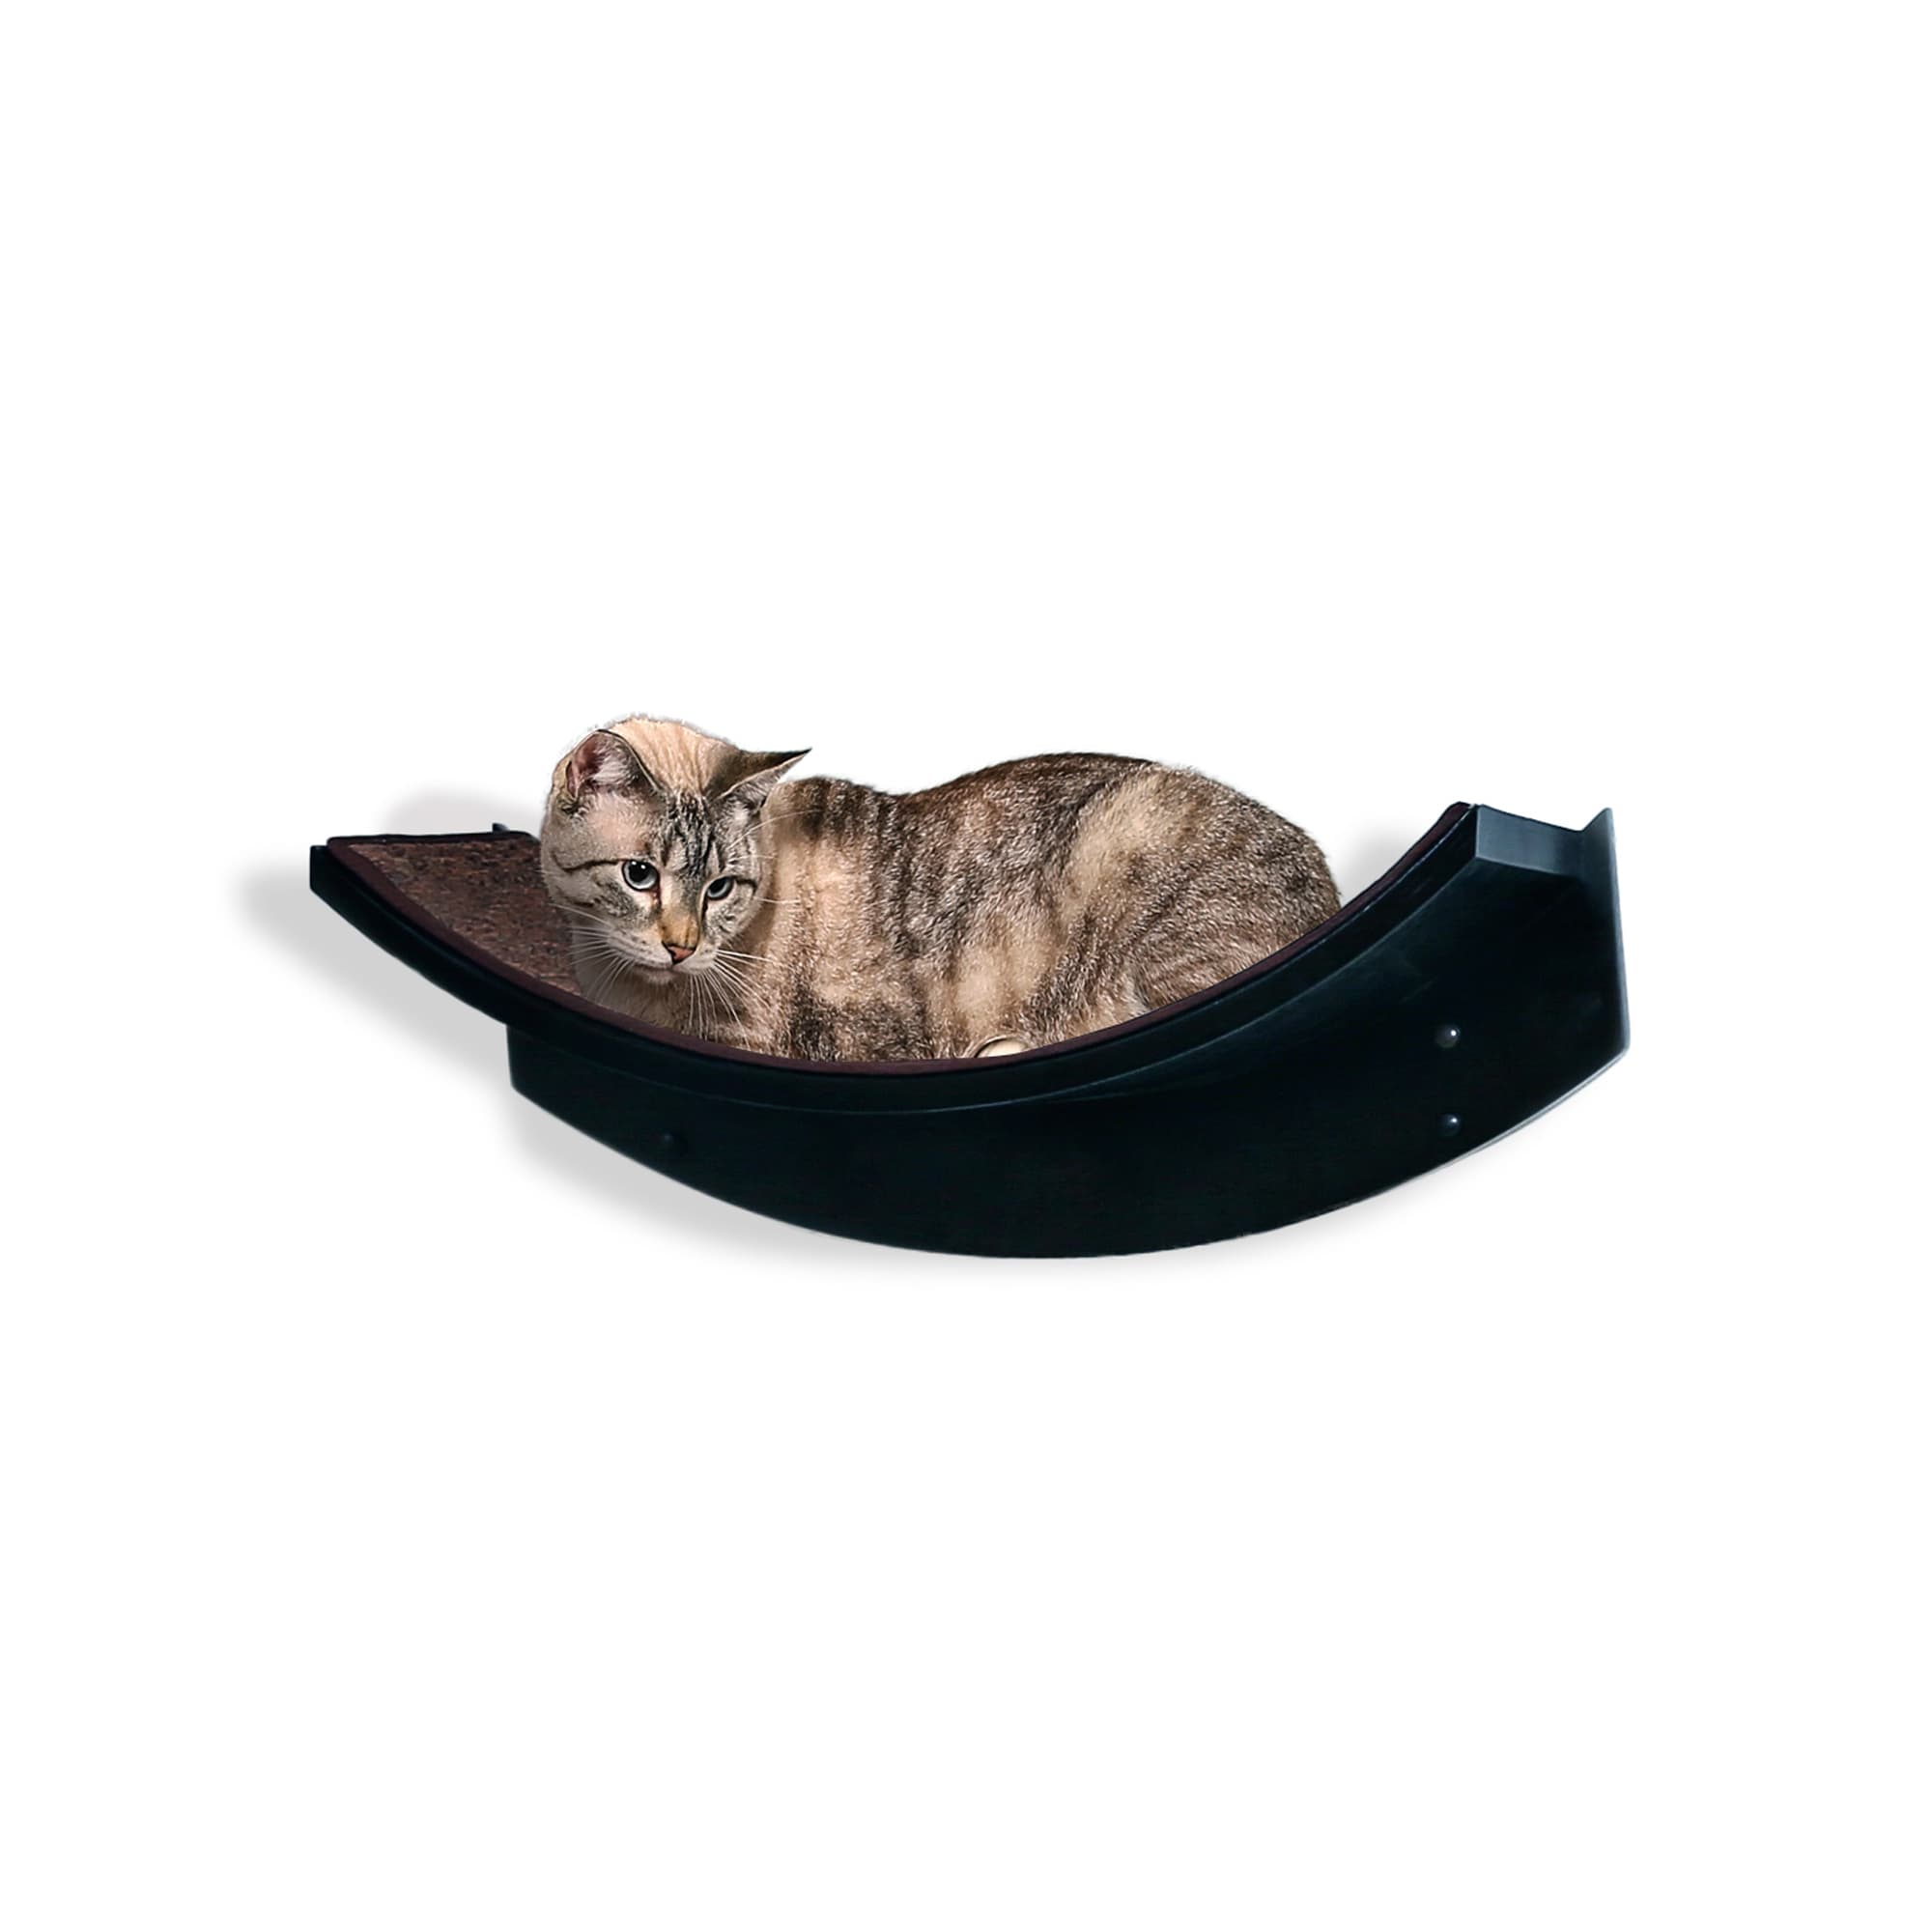 Photos - Other for Cats The Refined Feline The Refined Feline Lotus Leaf Cat Shelf In Espresso, 22